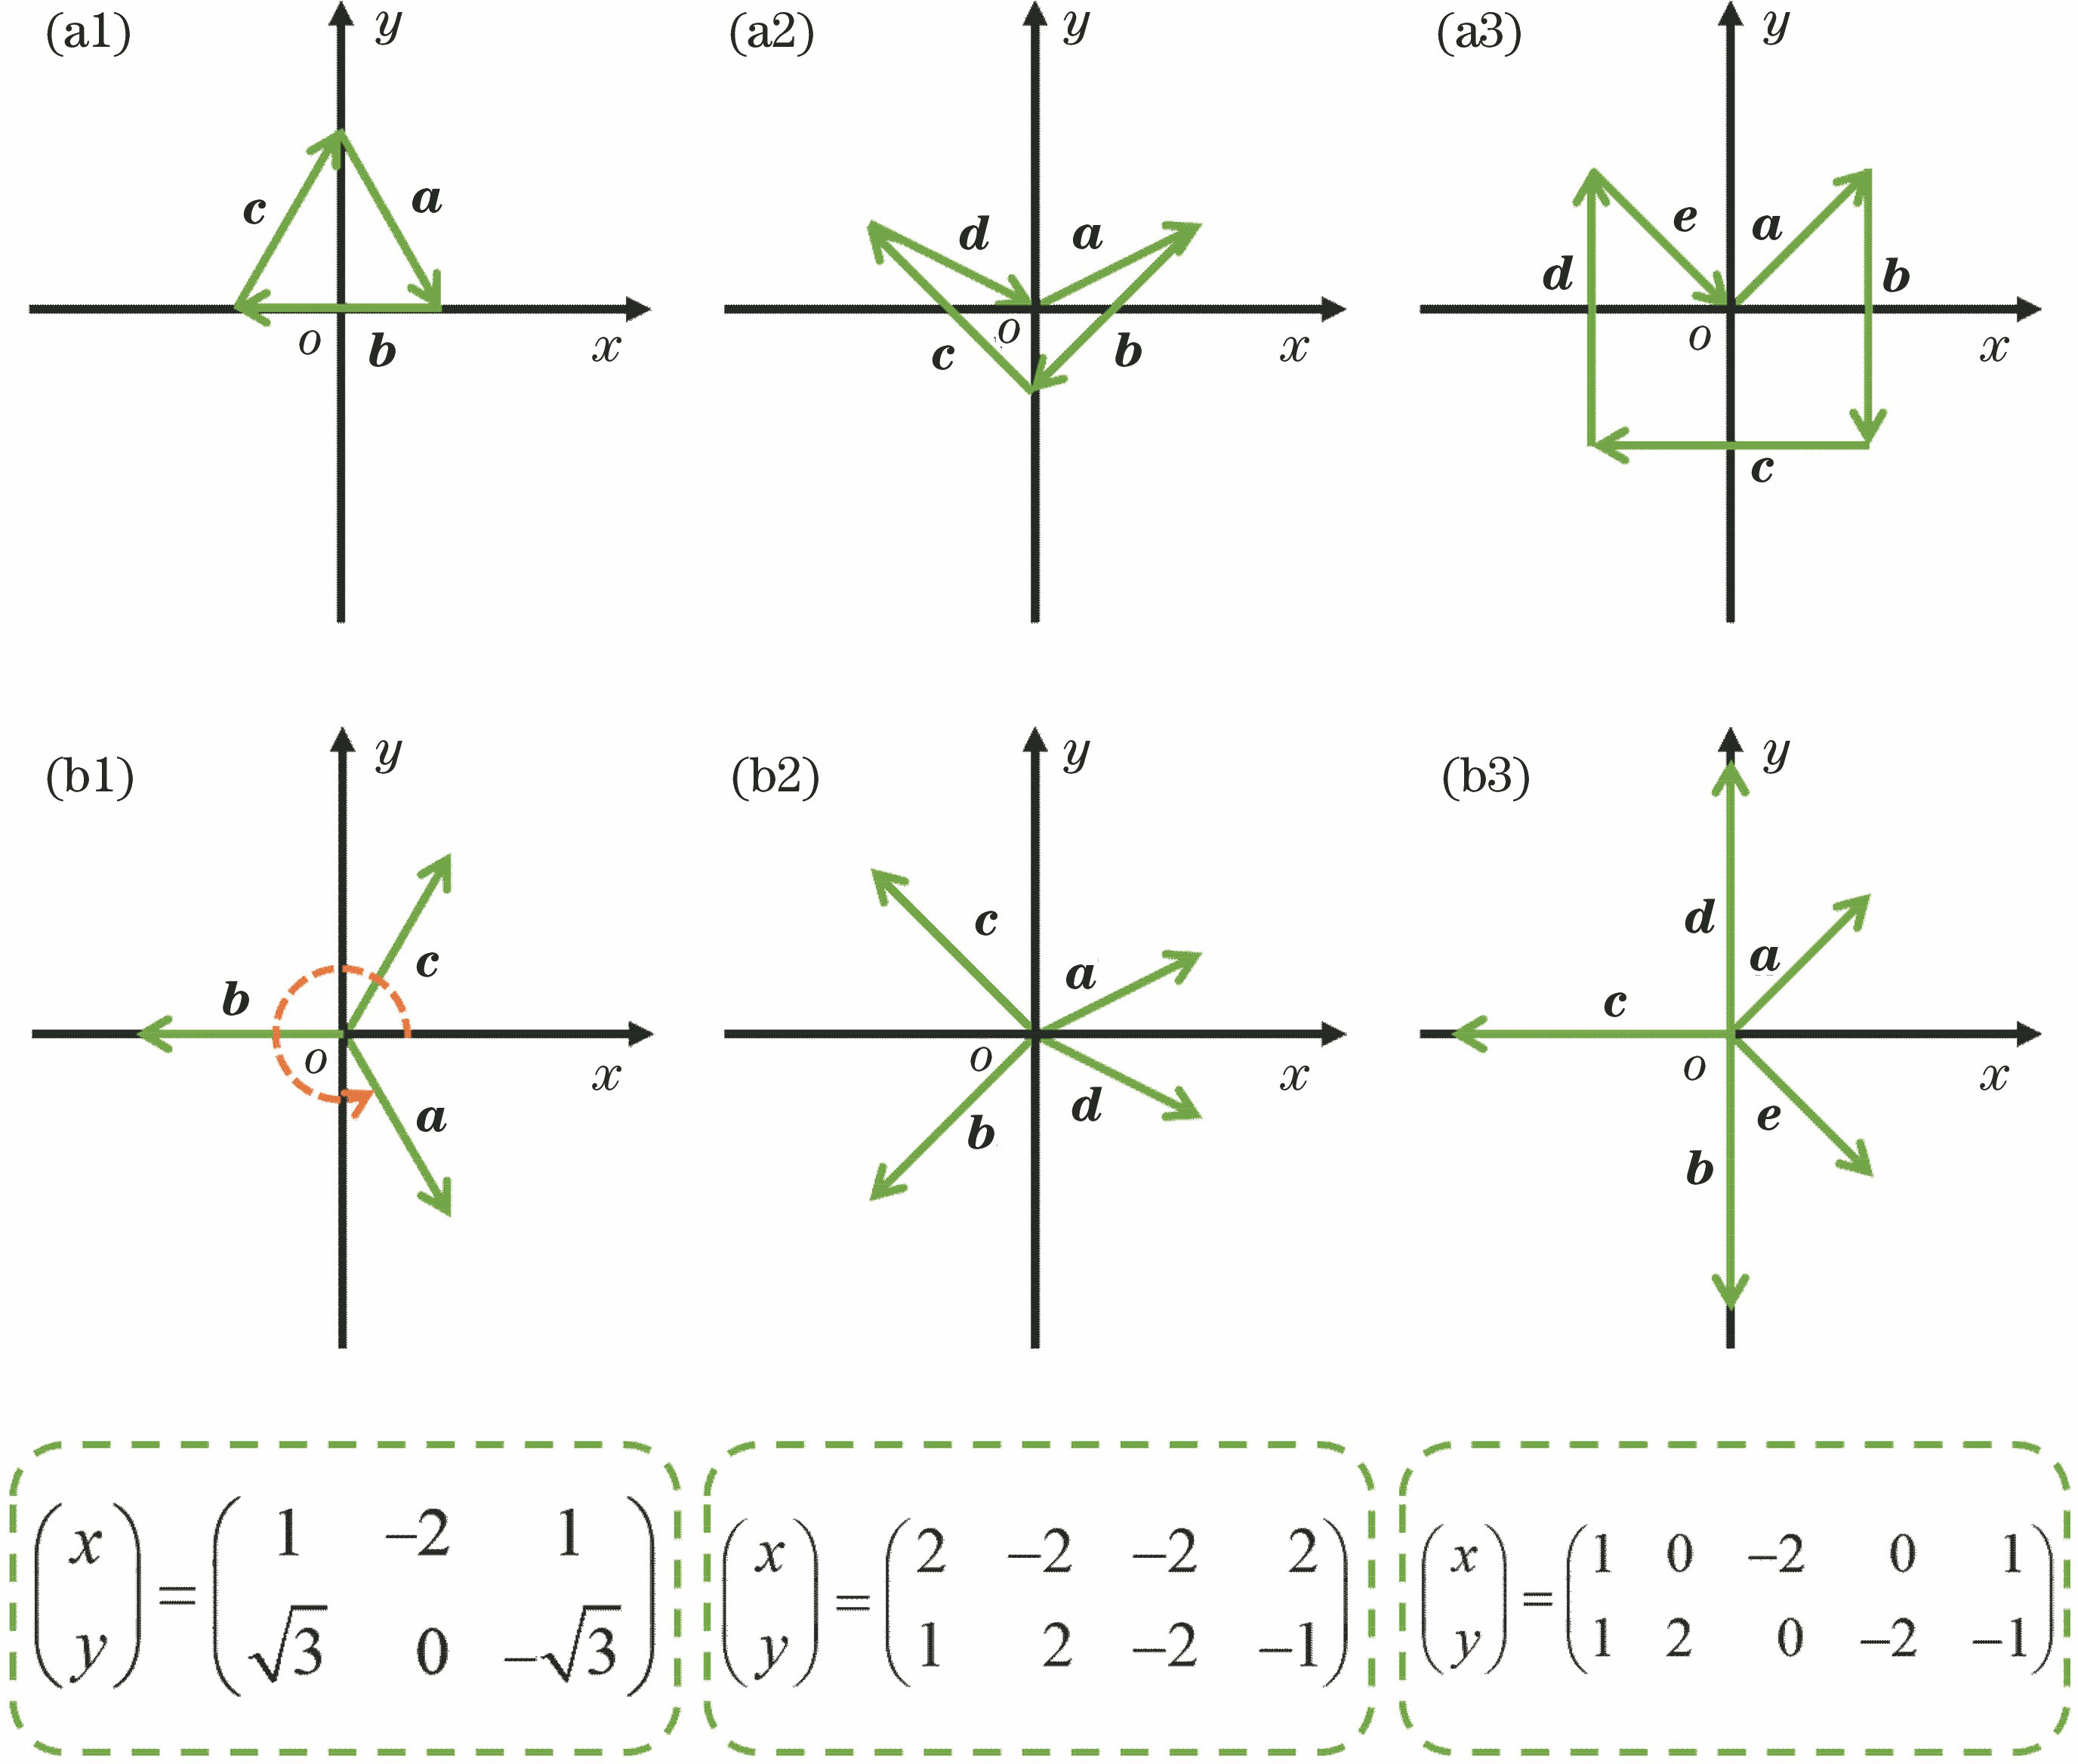 Representation of wave vector coordinate and matrix. (a1)--(a3) Wave vector coordinate distribution patterns; (b1)--(b3) transferred wave vector coordinate distribution patterns. Bottom panel is its corresponding wave vector coordinate matrix representation